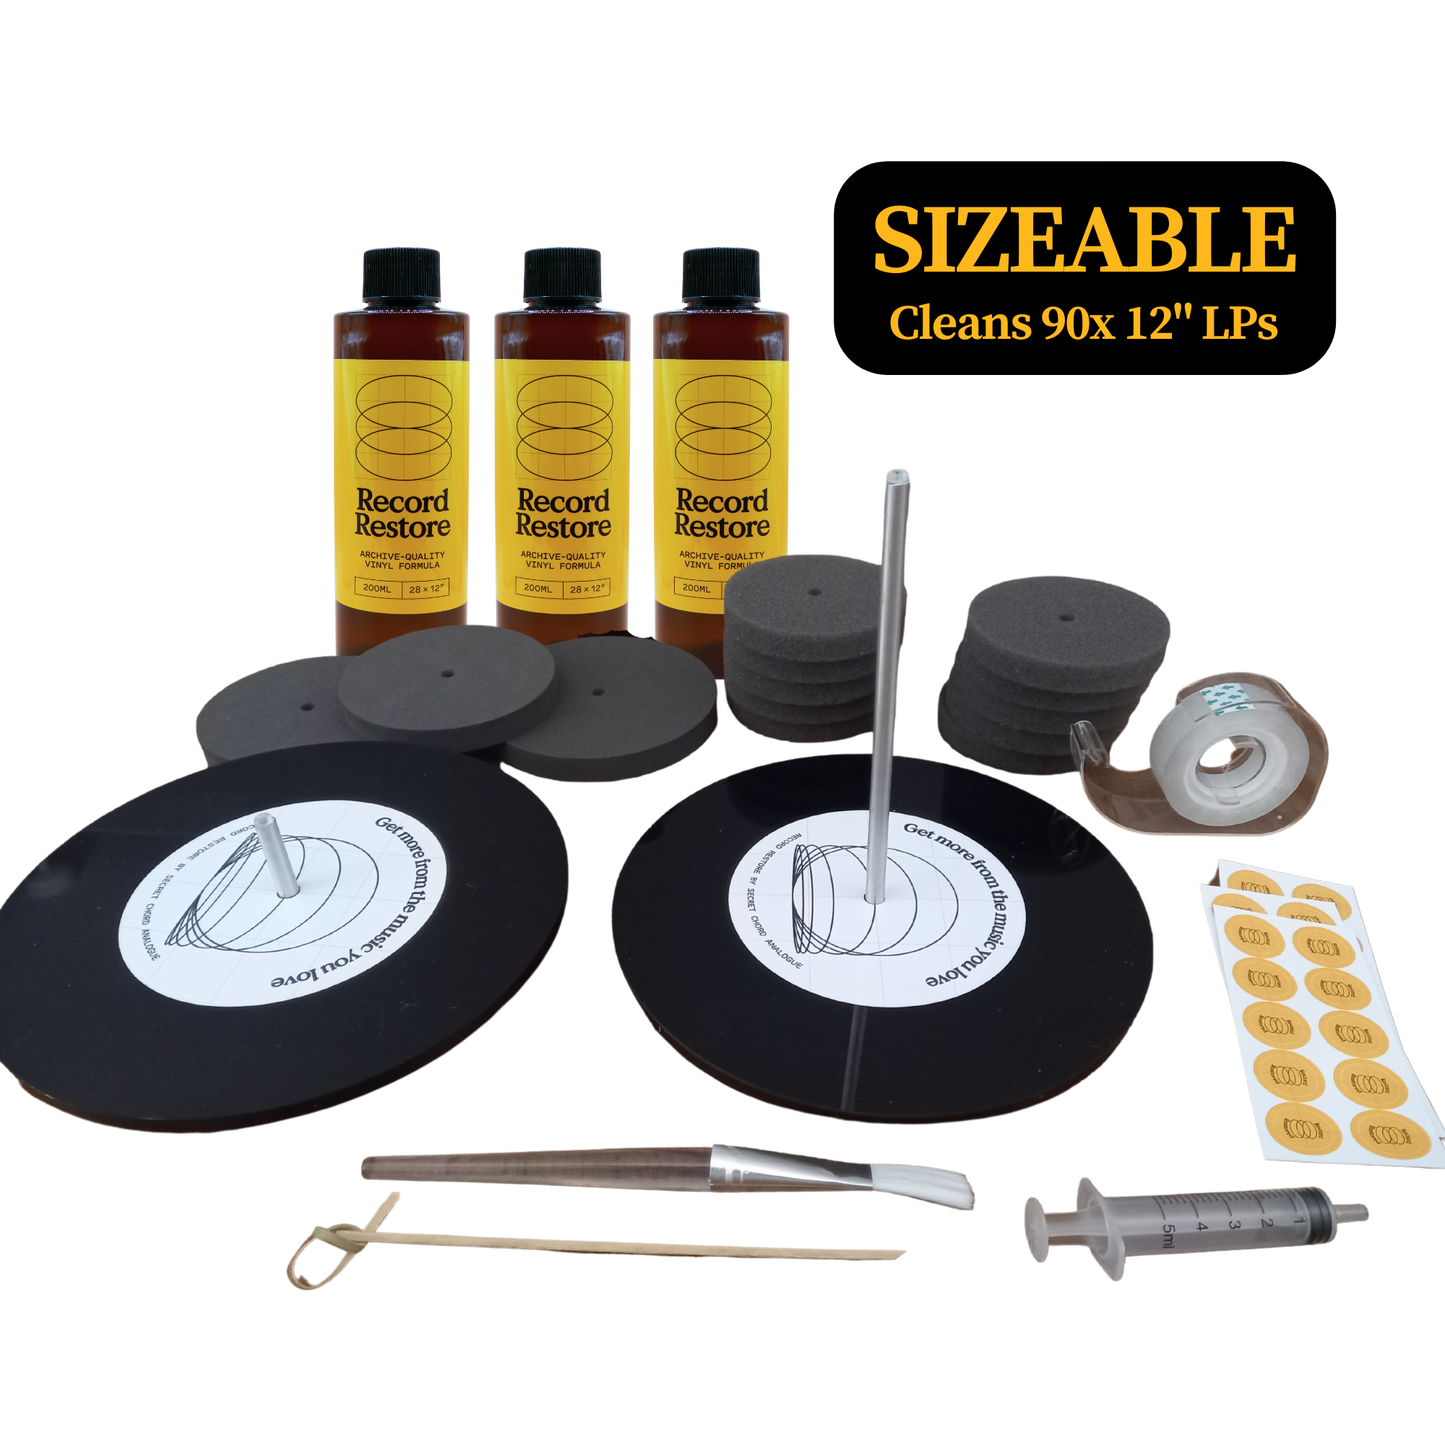 Record Restore Vinyl Record Cleaning Kit Sizeable